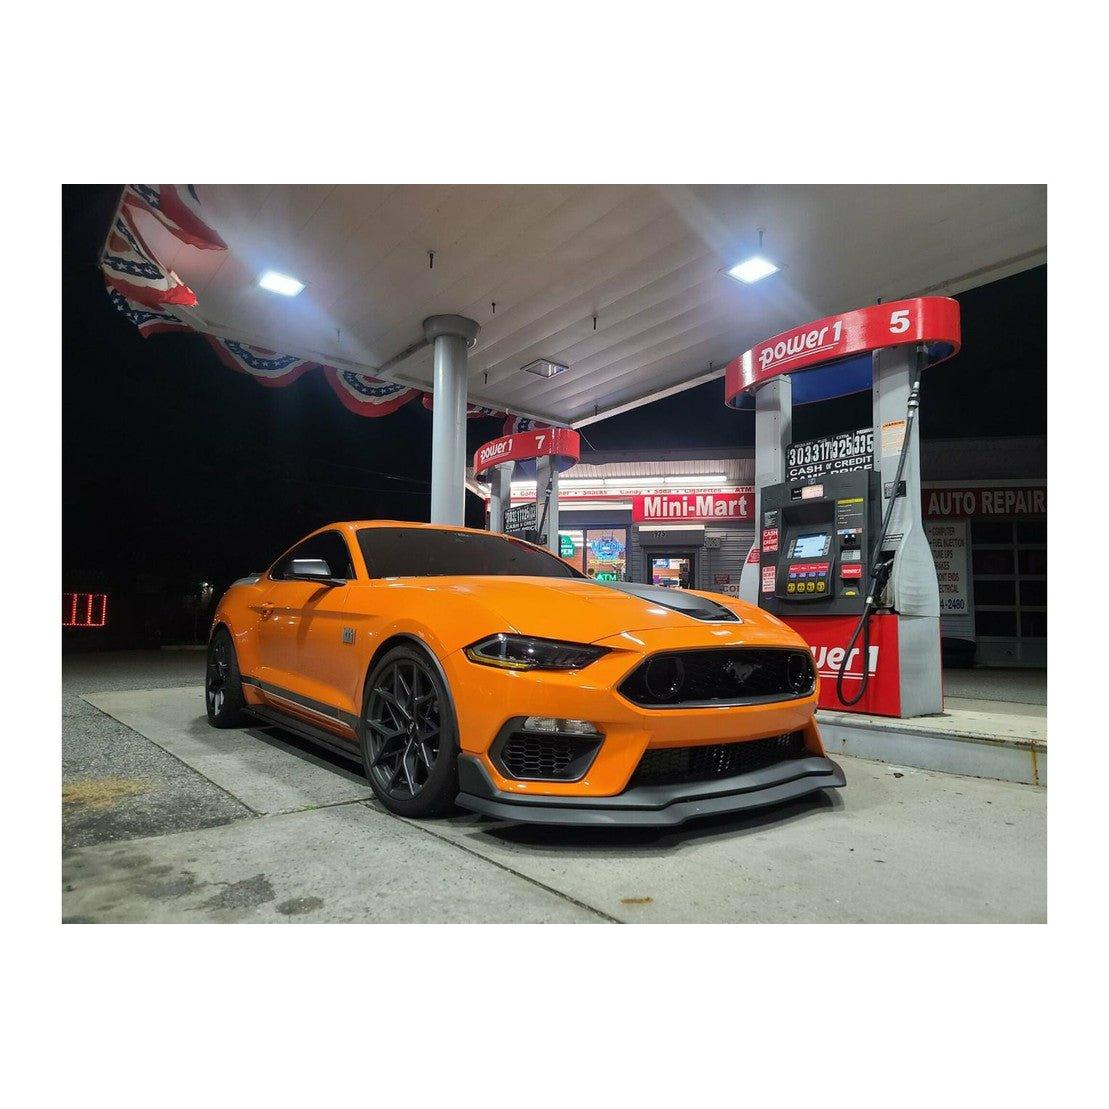 2018-2022 Ford Mustang | Morimoto XB LED Headlights Pair ASM - Truck Accessories Guy